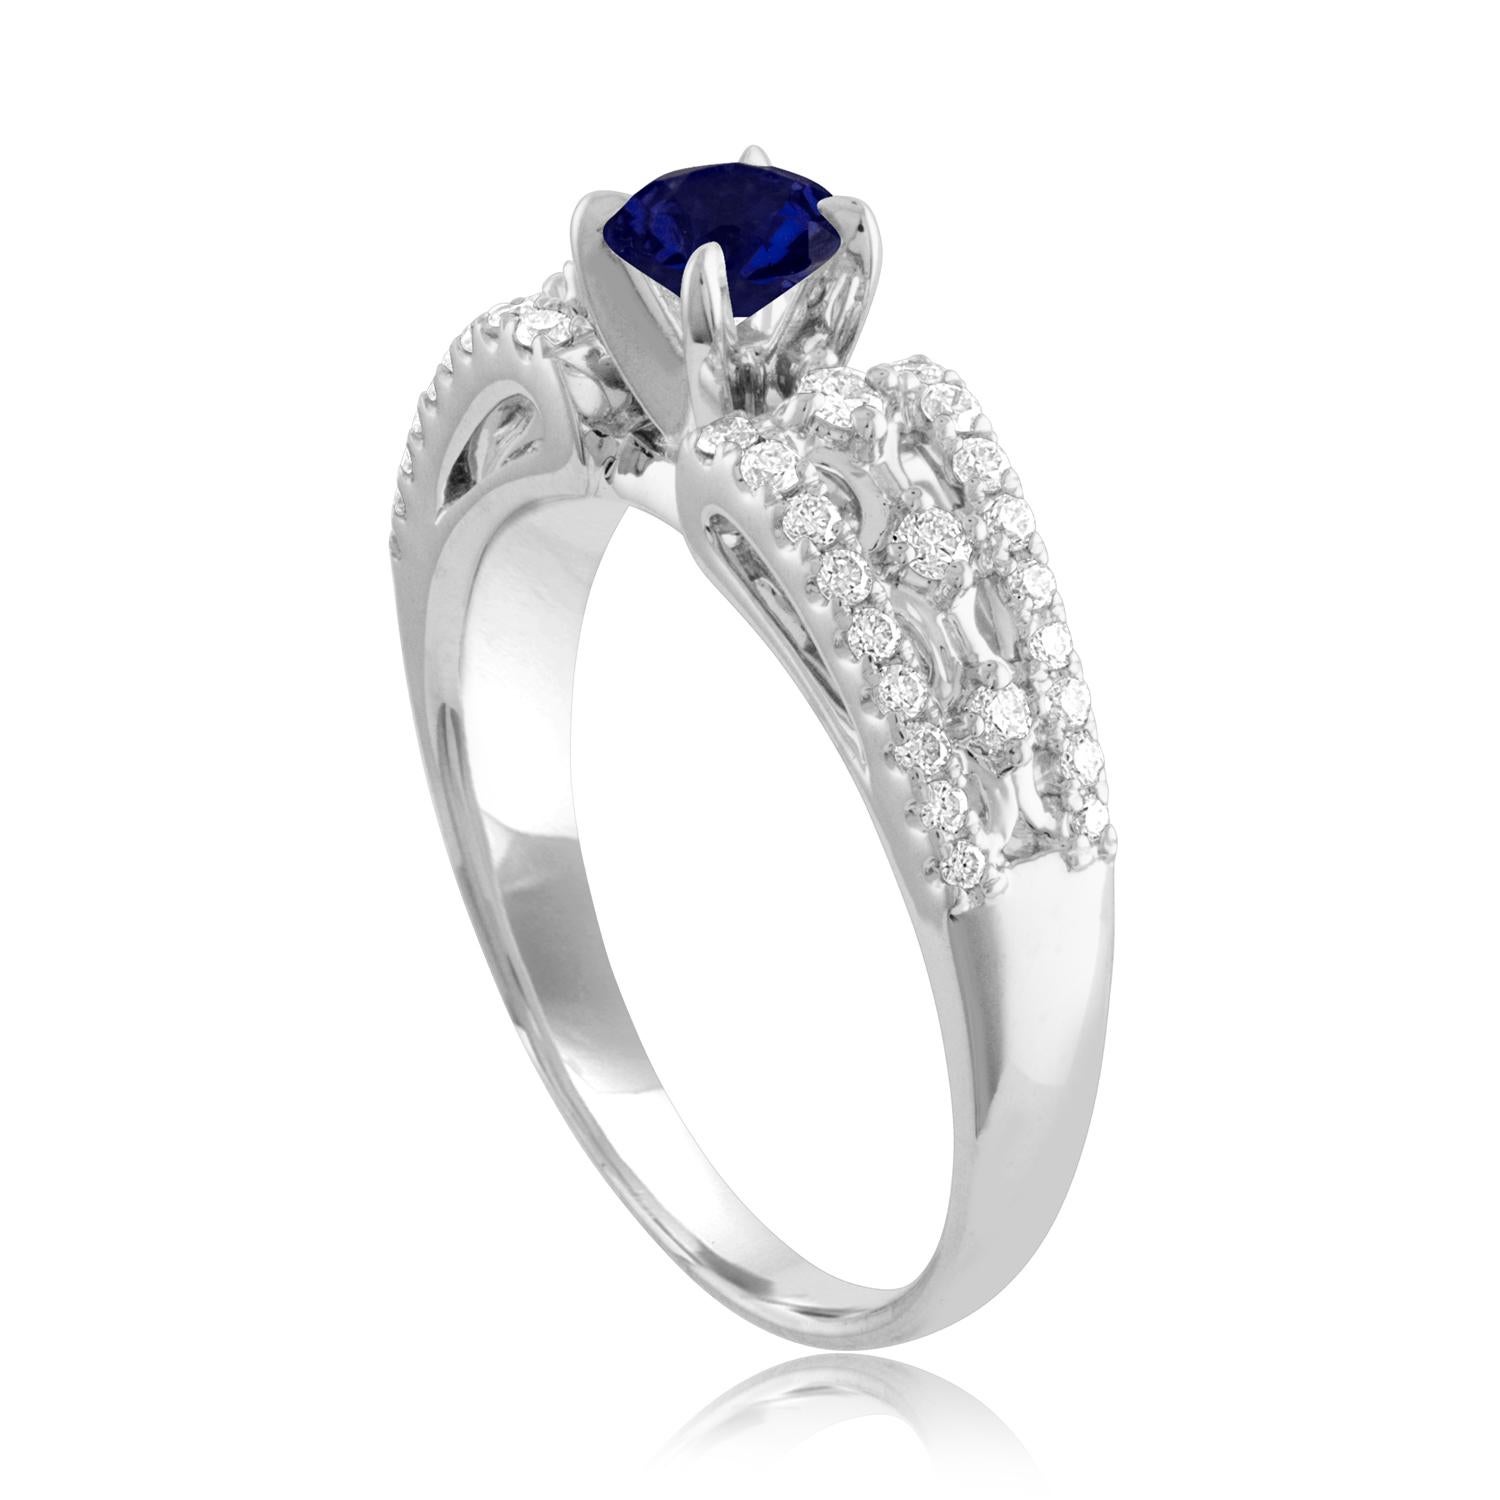 Beautiful Sapphire Ring
The ring is 18K White Gold
The Center Stone is a Round Blue Sapphire 0.80 Carats
The Sapphire is AGL Certified Heated
There are 0.33 Carats in Diamonds F/G VS/SI
The ring is a size 6.75, sizable
The ring weighs 4.8 grams